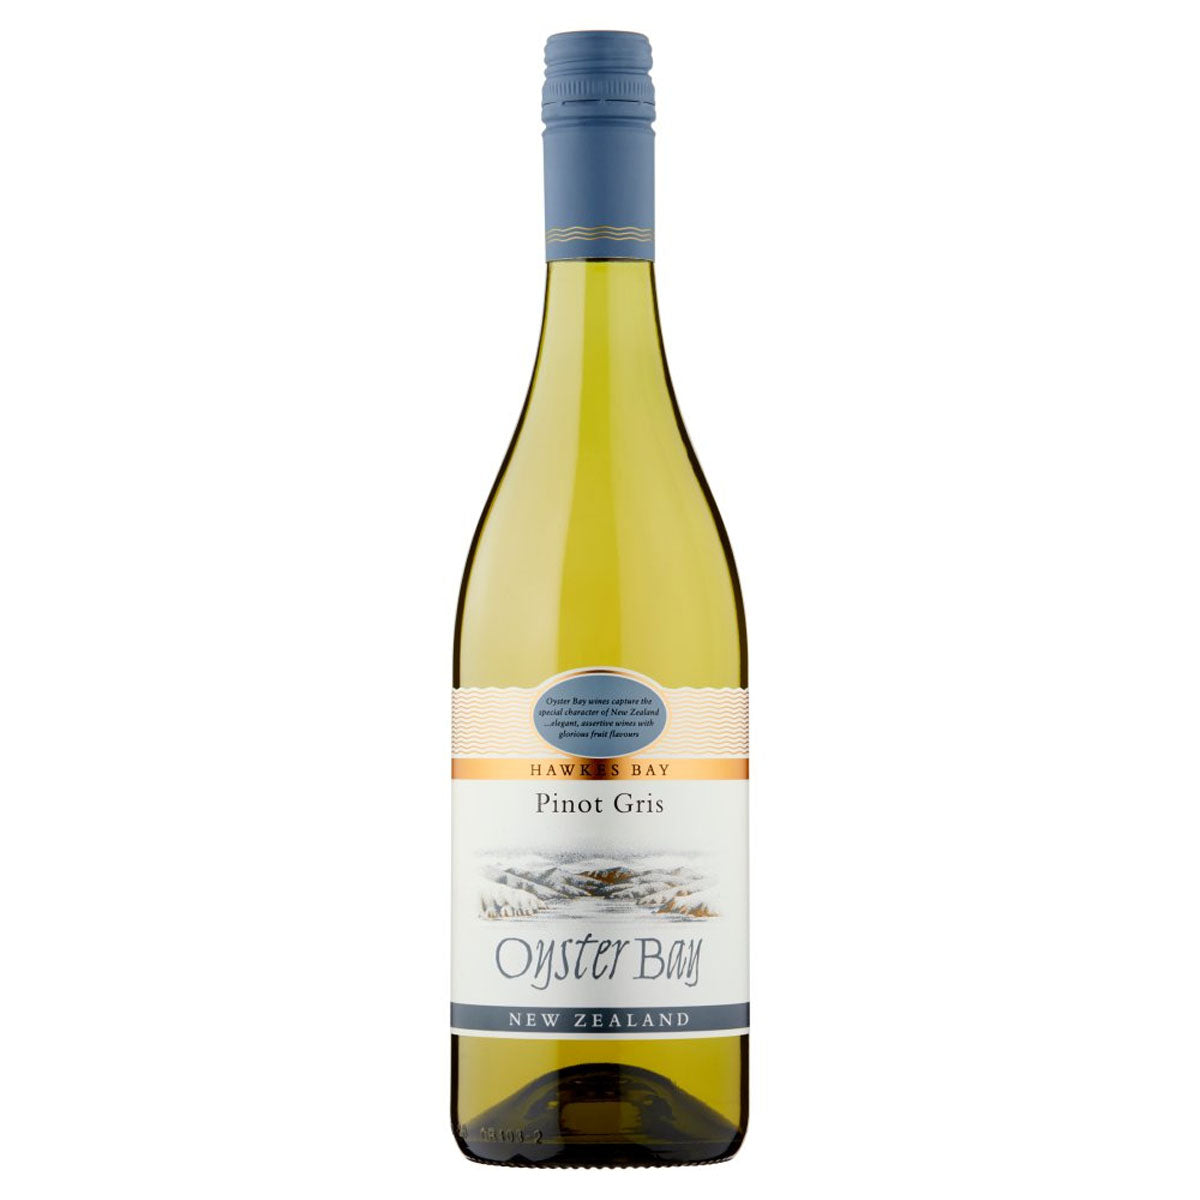 A bottle of Oyster Bay - Hawkes Bay Pinot Gris (12.5% ABV) - 750ml on a white background.